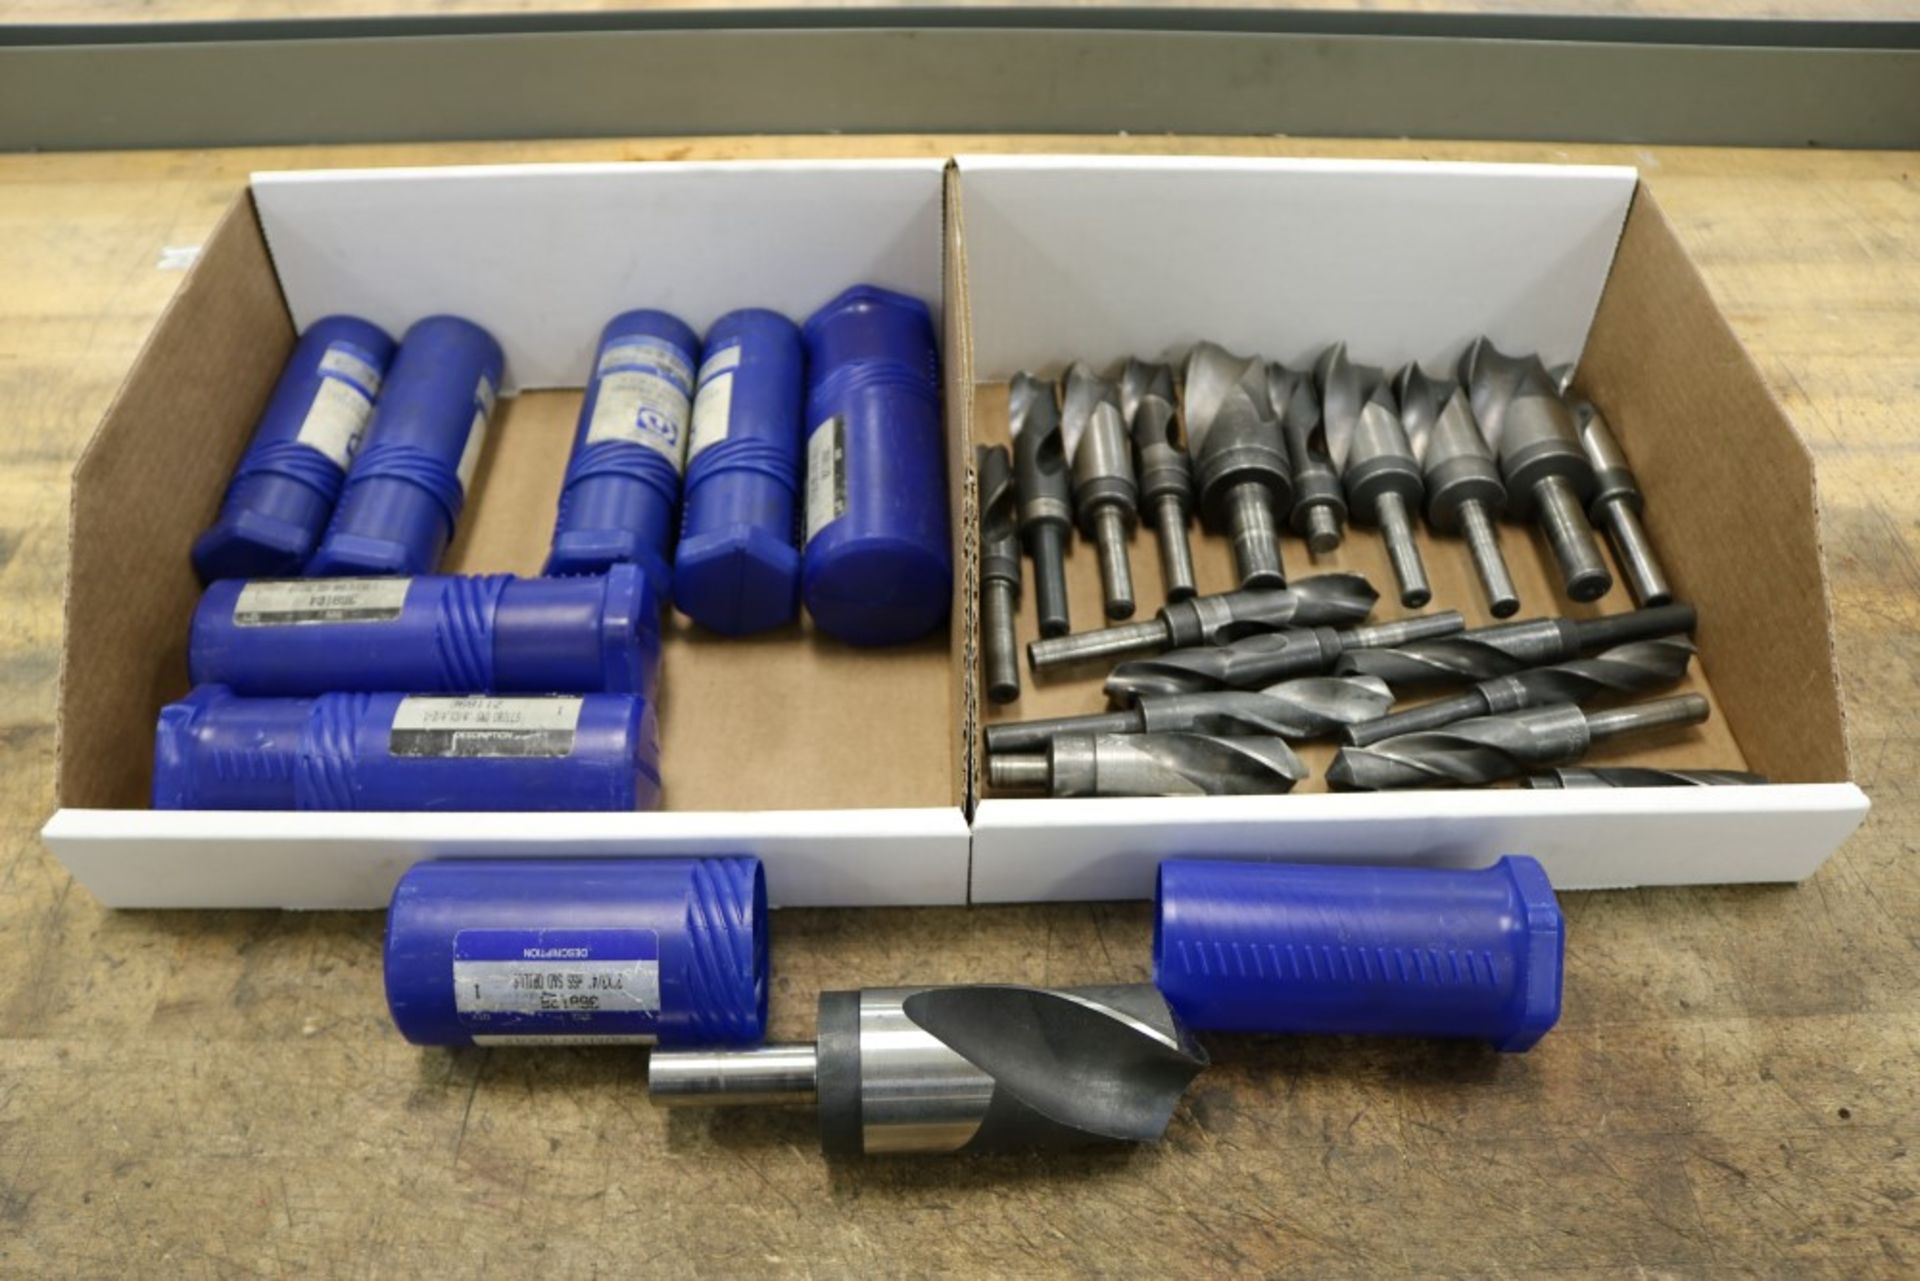 Drills - Various Box of Large Drill Bits 3/4" to 2-3/4" - Image 2 of 6